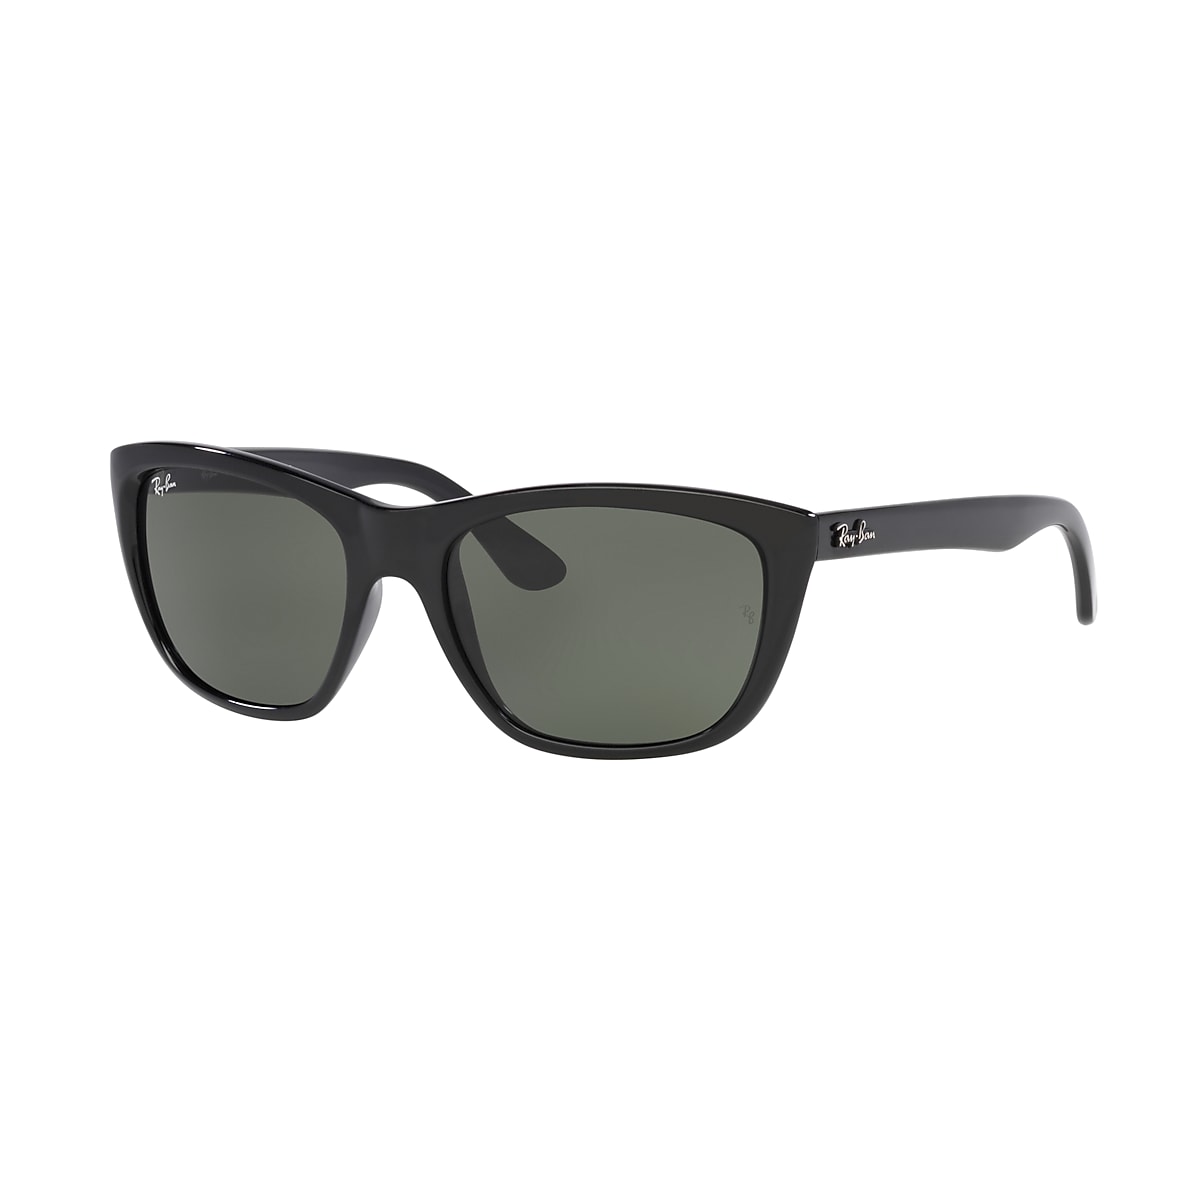 RB4154 Sunglasses in Black Green - RB4154 | Ray-Ban®